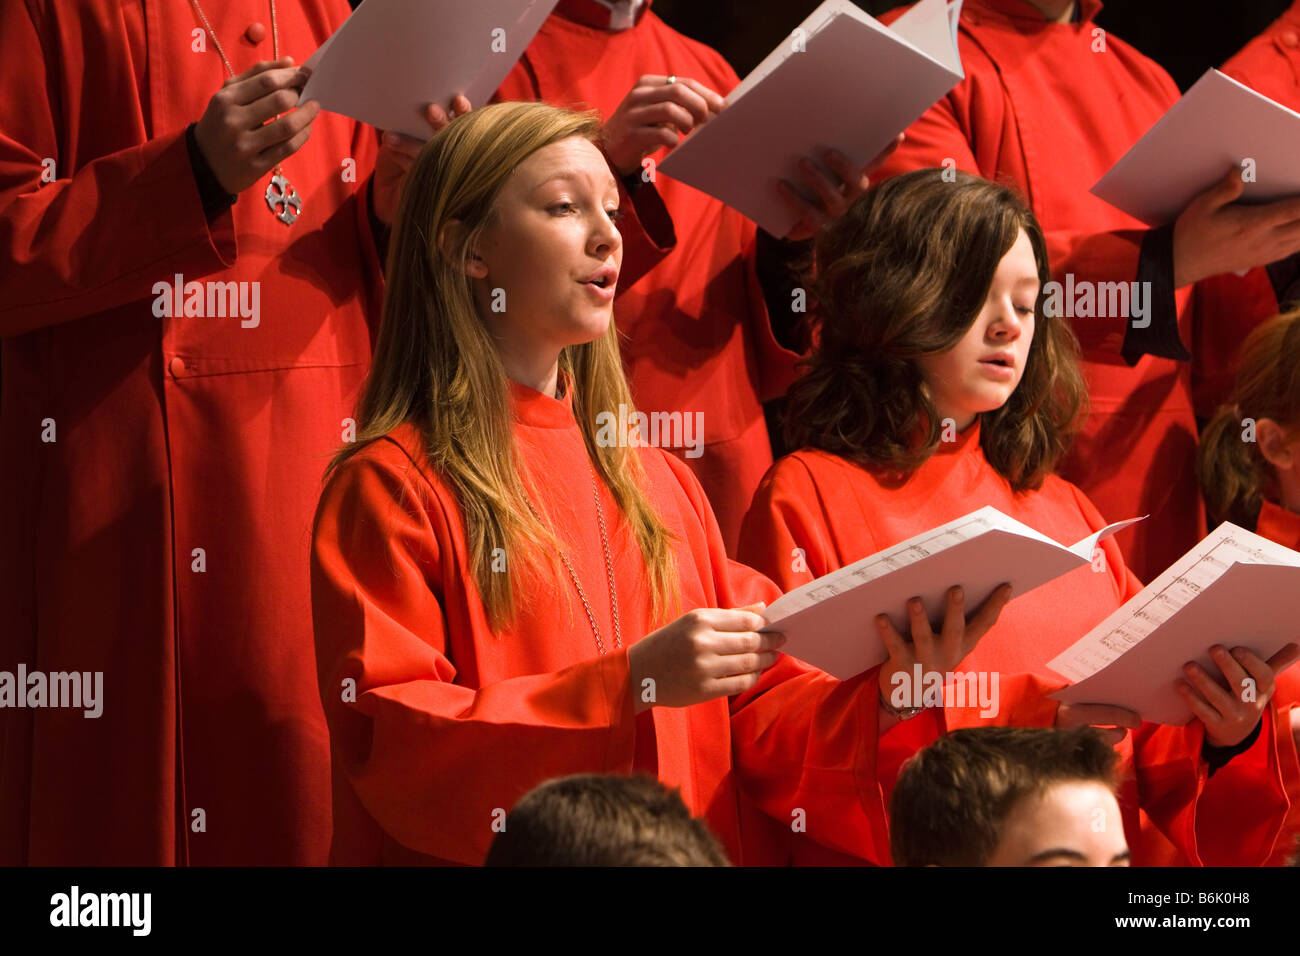 UK Cheshire Chester Cathedral Choir Choristers in rehearsal for Christmas Carol Concert Stock Photo